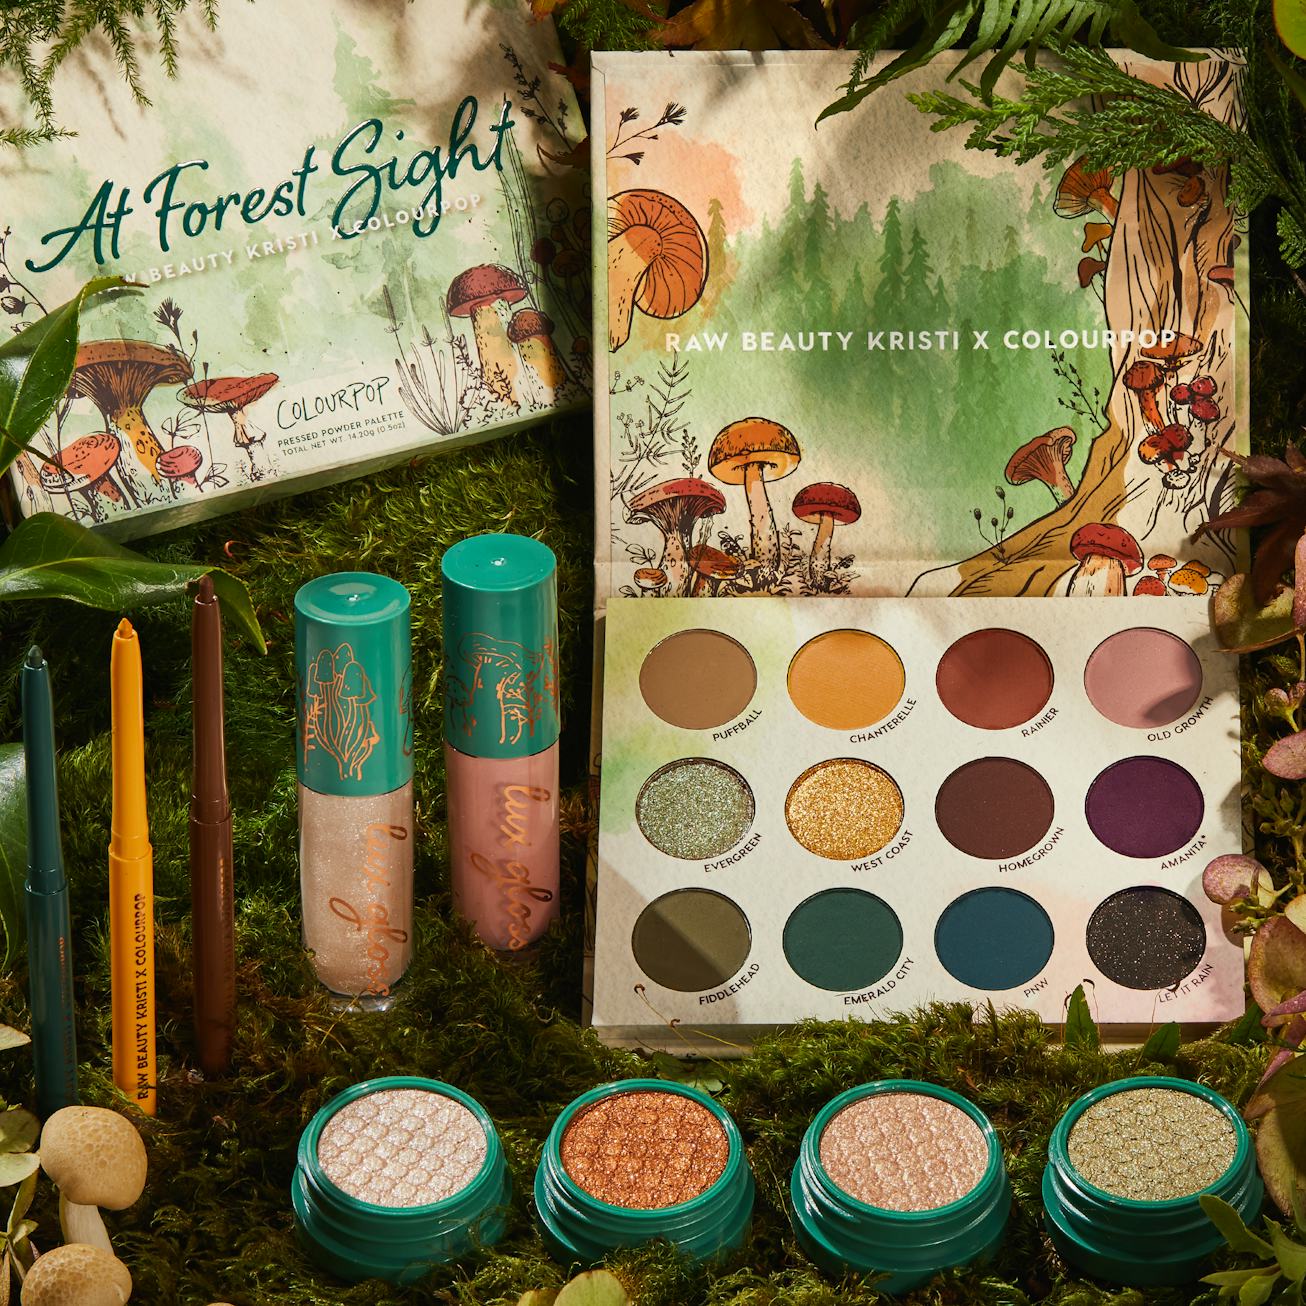 Raw Beauty Kristi makeup collection for ColourPop